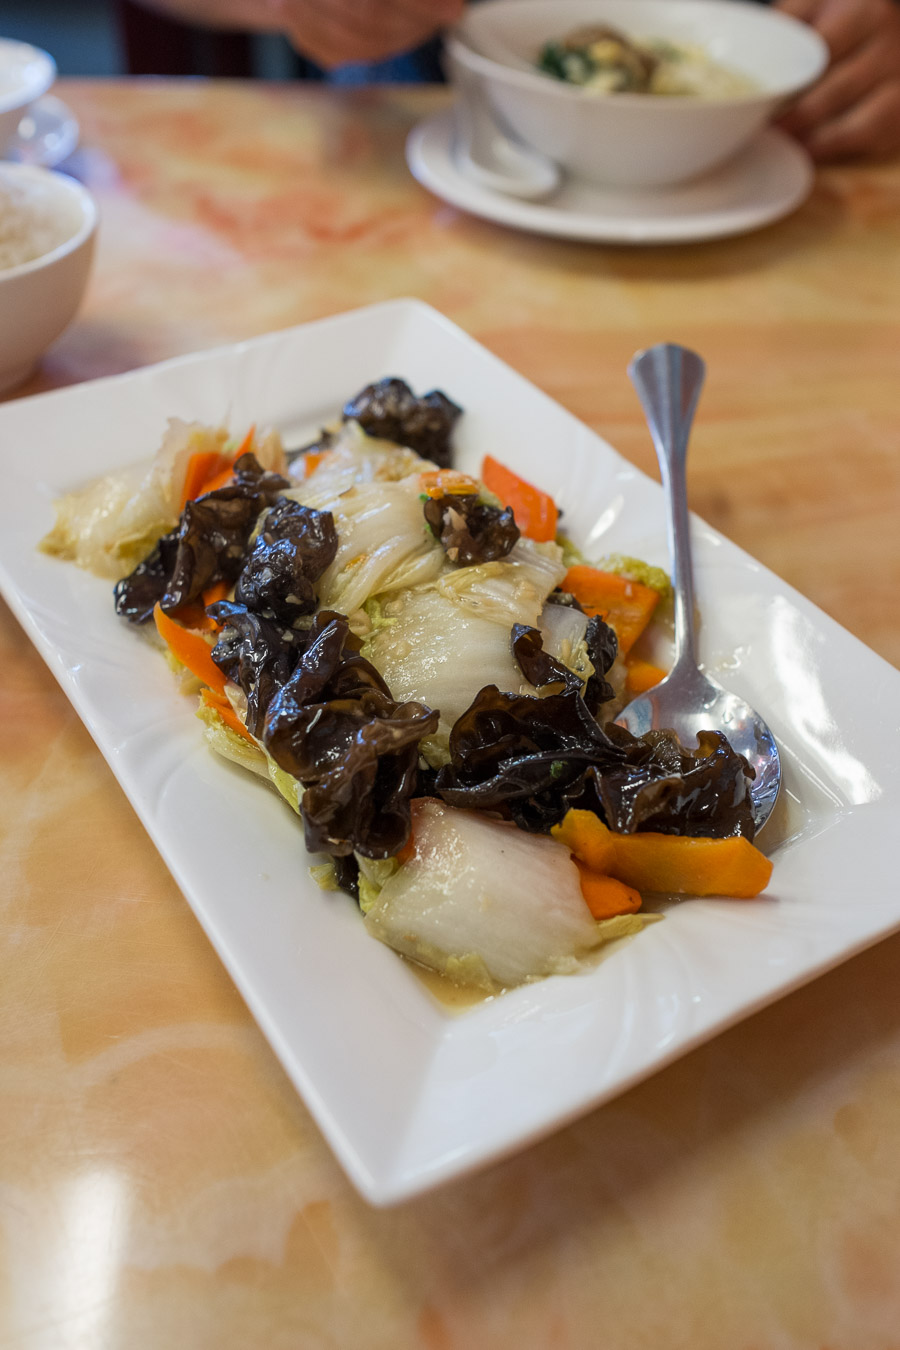 Cabbage and black fungus